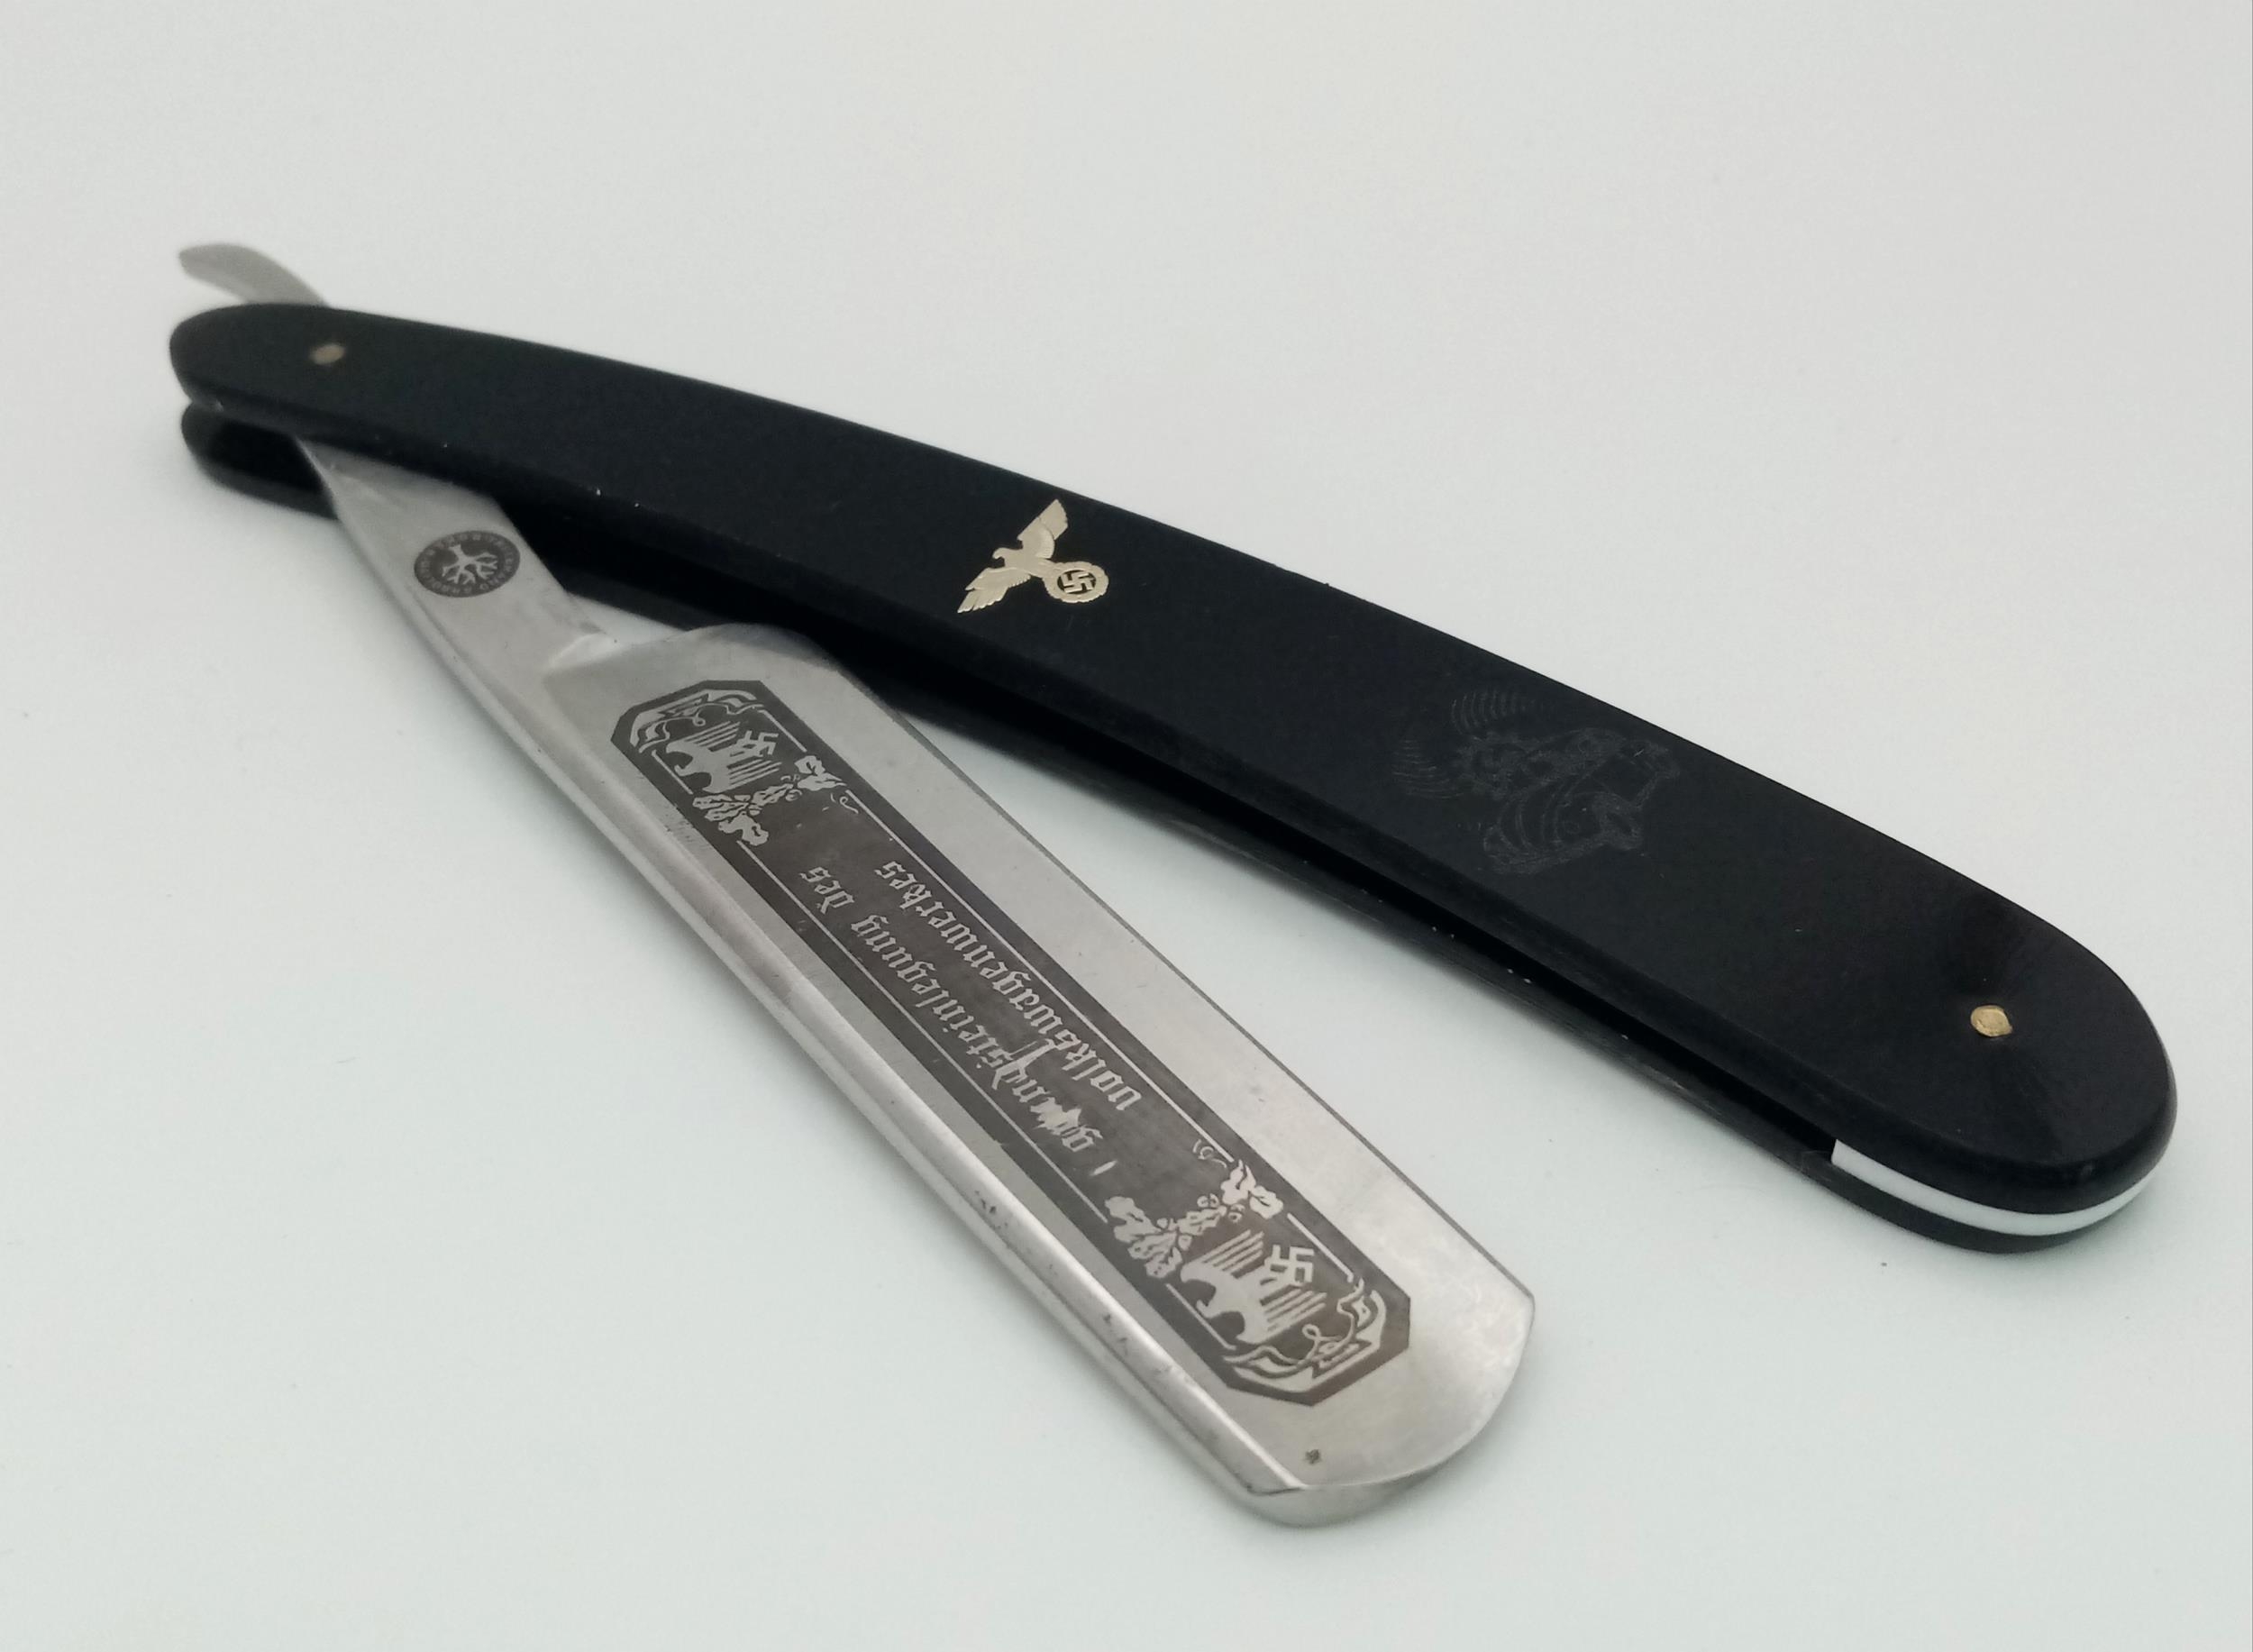 3rd Reich Patriotic Cut Throat Razor. Blade has been etched “Made from steel from the Volks Wagen